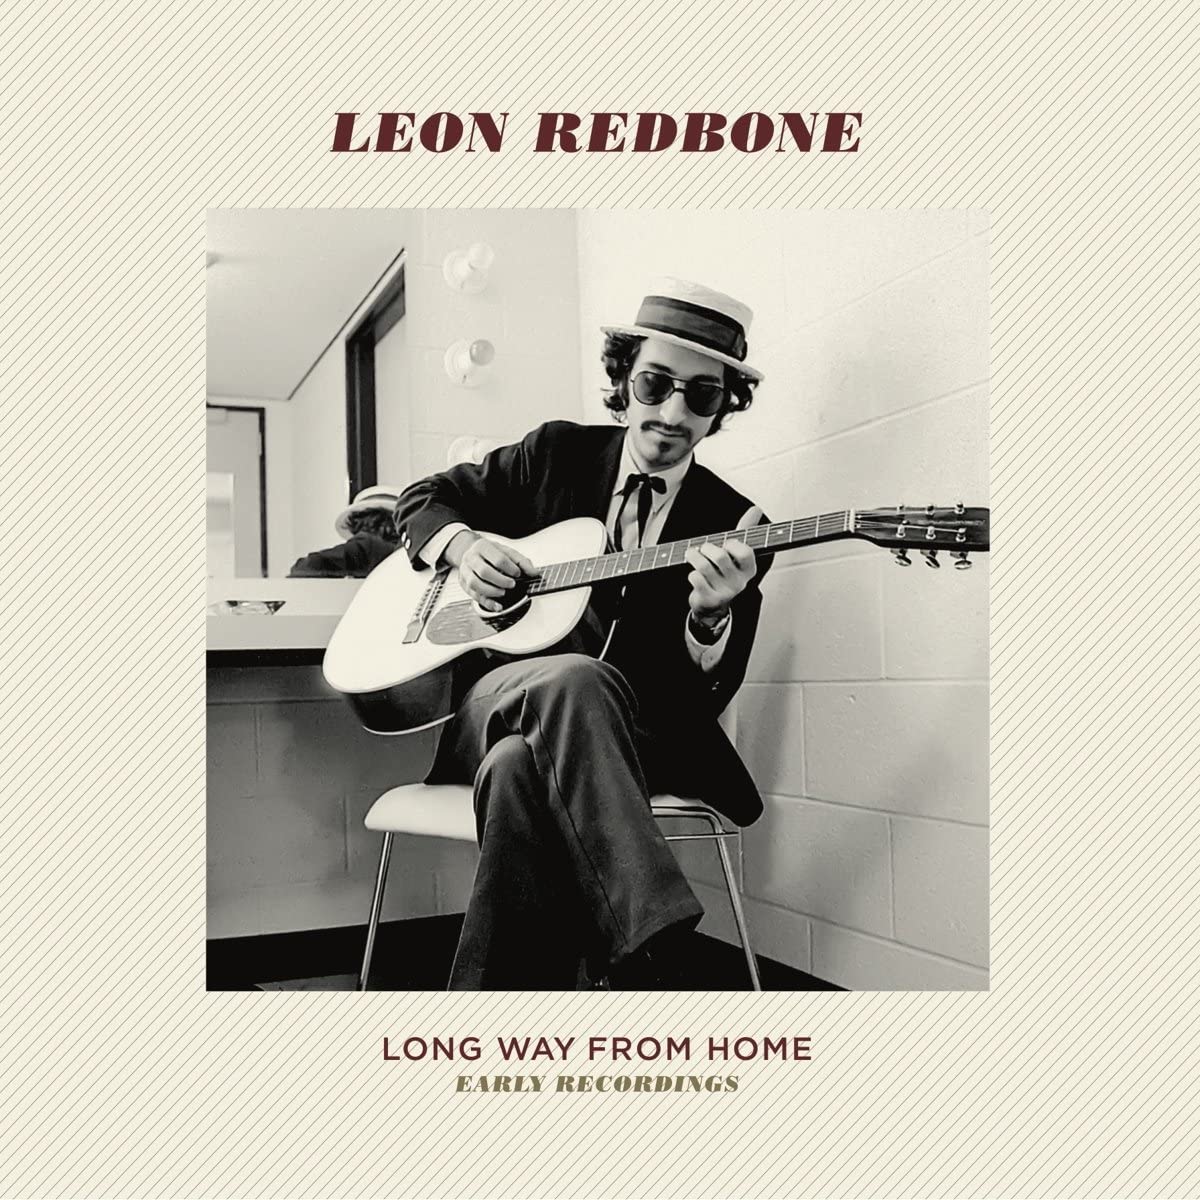 Redbone, Leon/Early Recordings - Long Way From Home [LP]